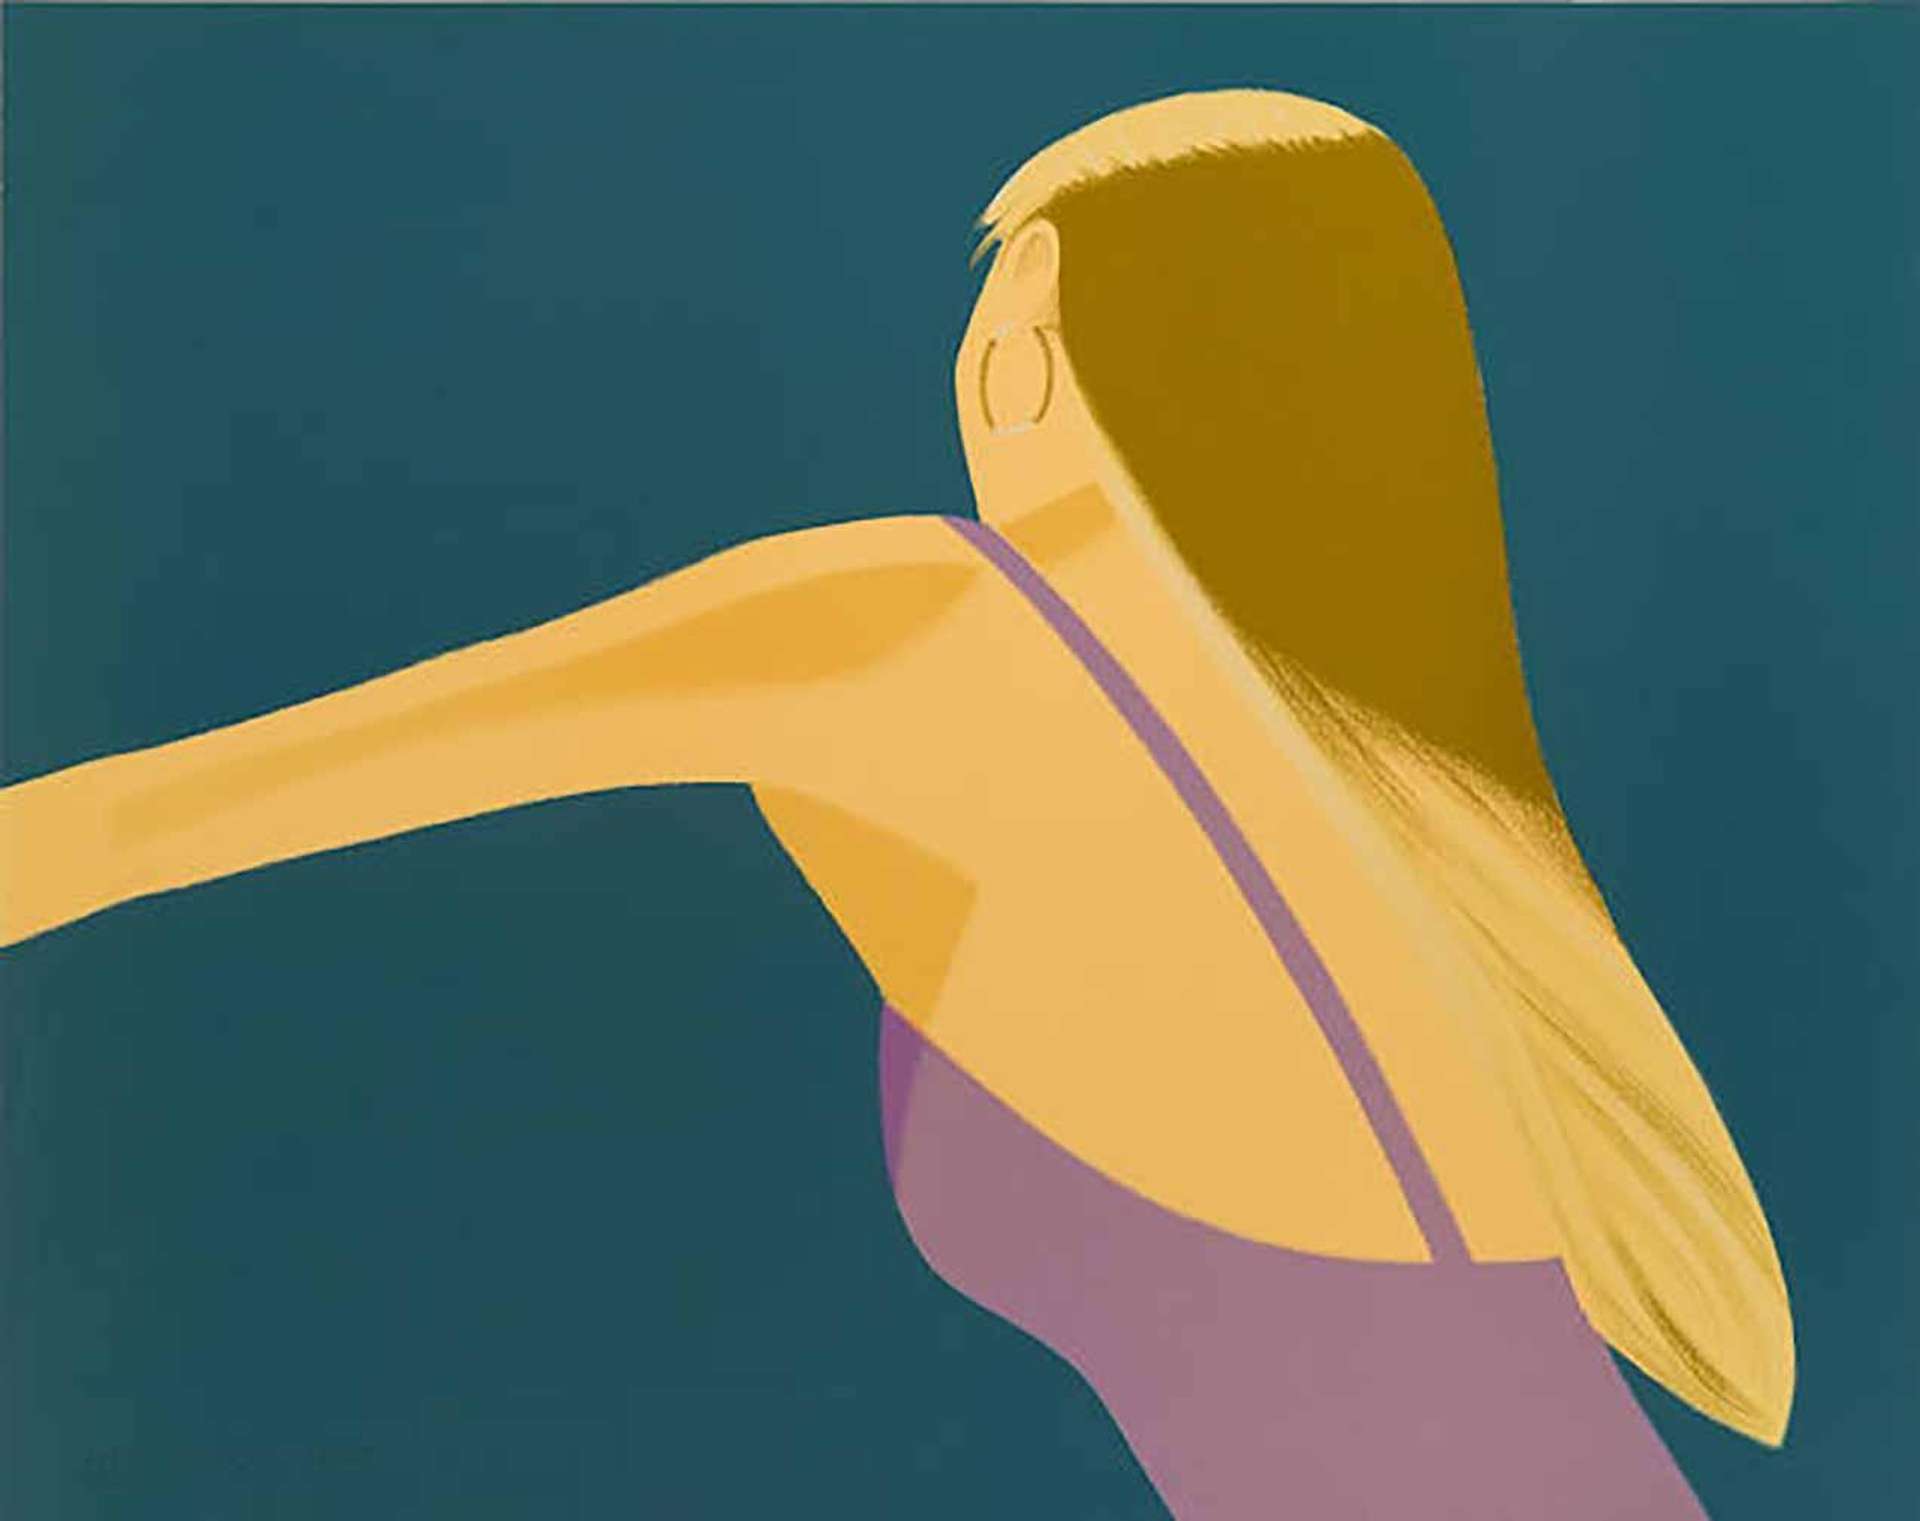 Alex Katz’s Night: William Dunas Dance IV. A lithograph of a woman with blonde hair in a purple dress’s back profile against a teal background.